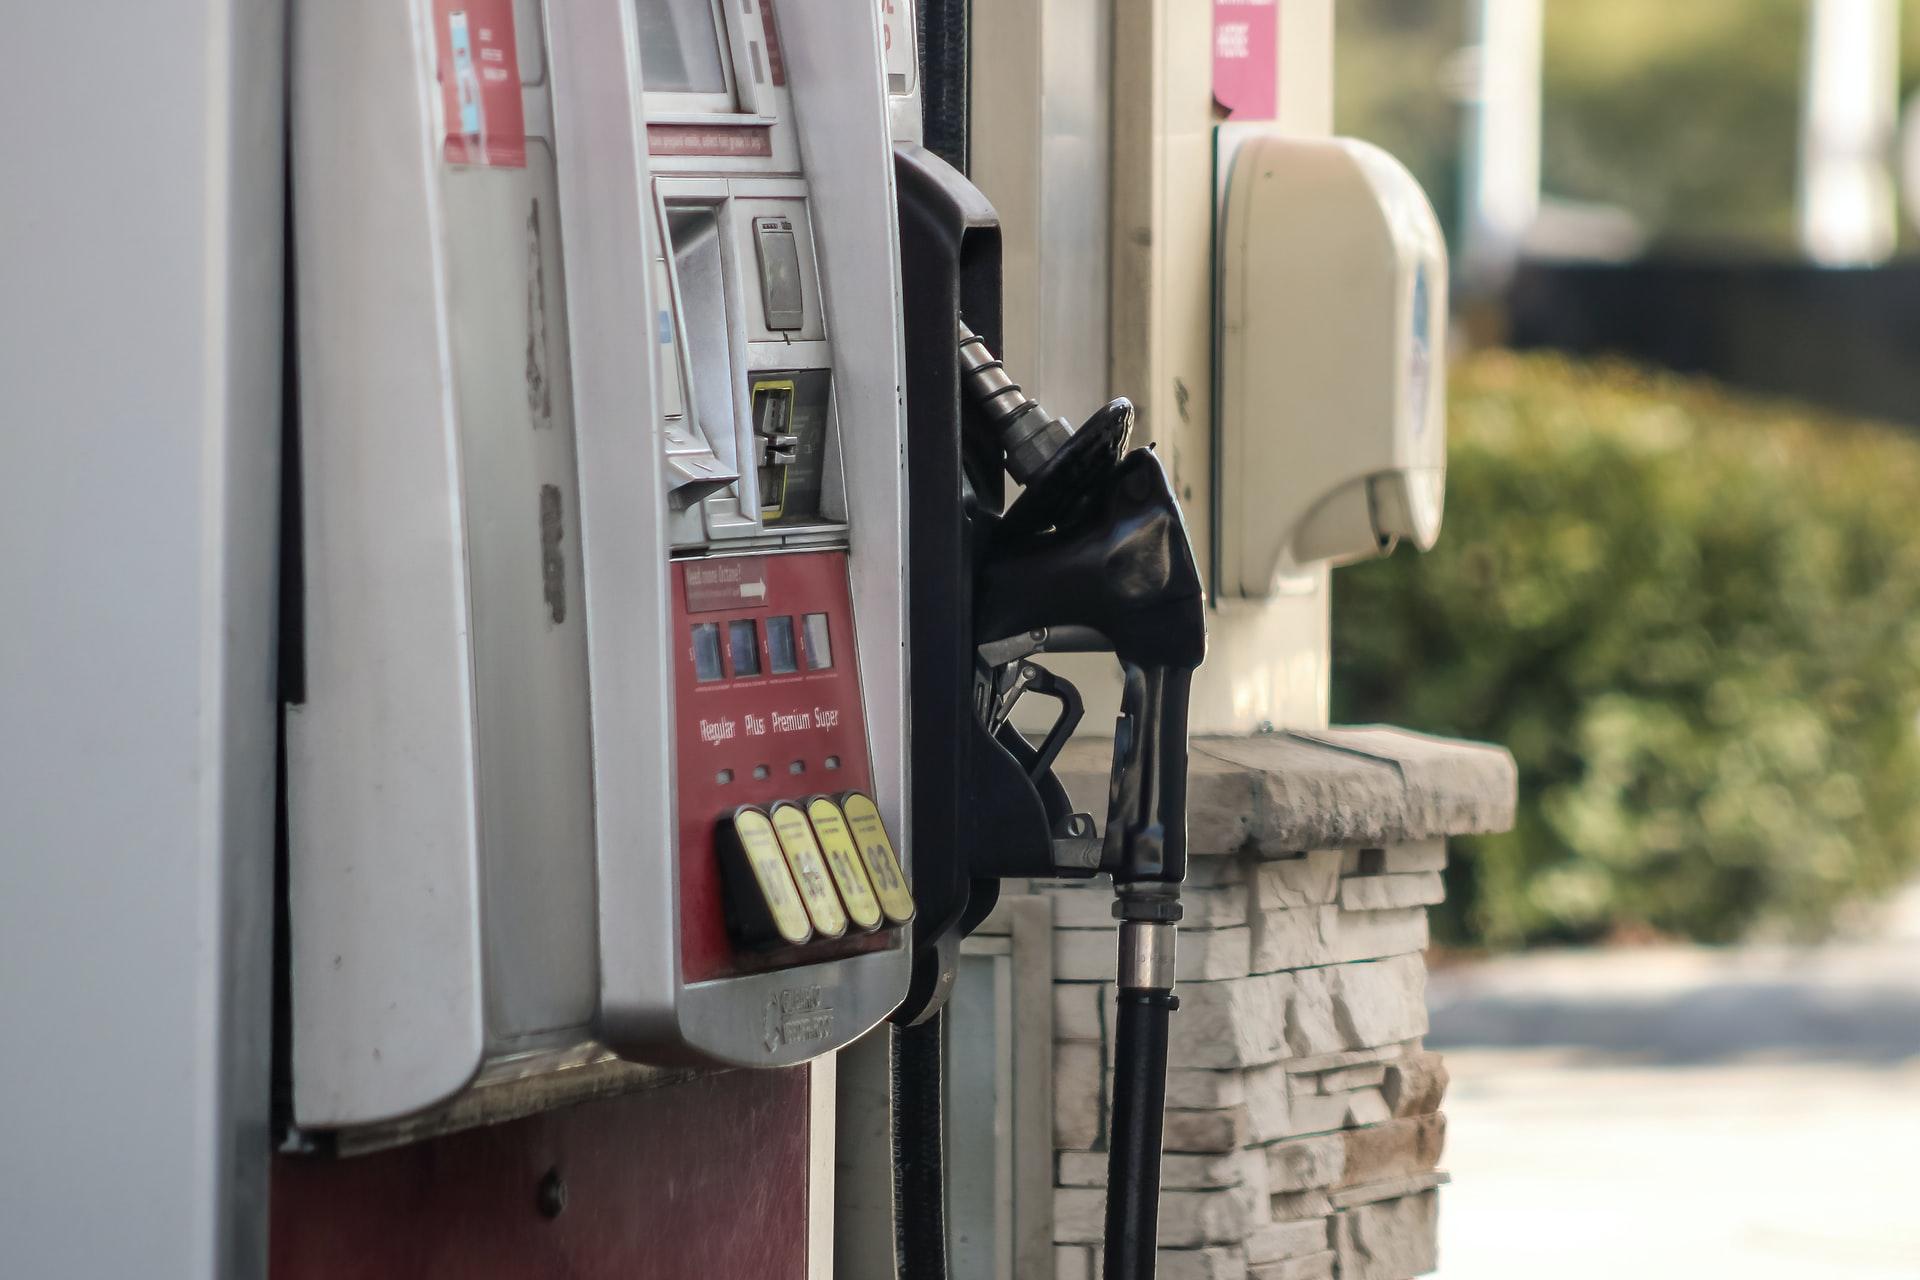 Depending on your car, using “Standard” gas instead of “Premium” might be bad for your car.